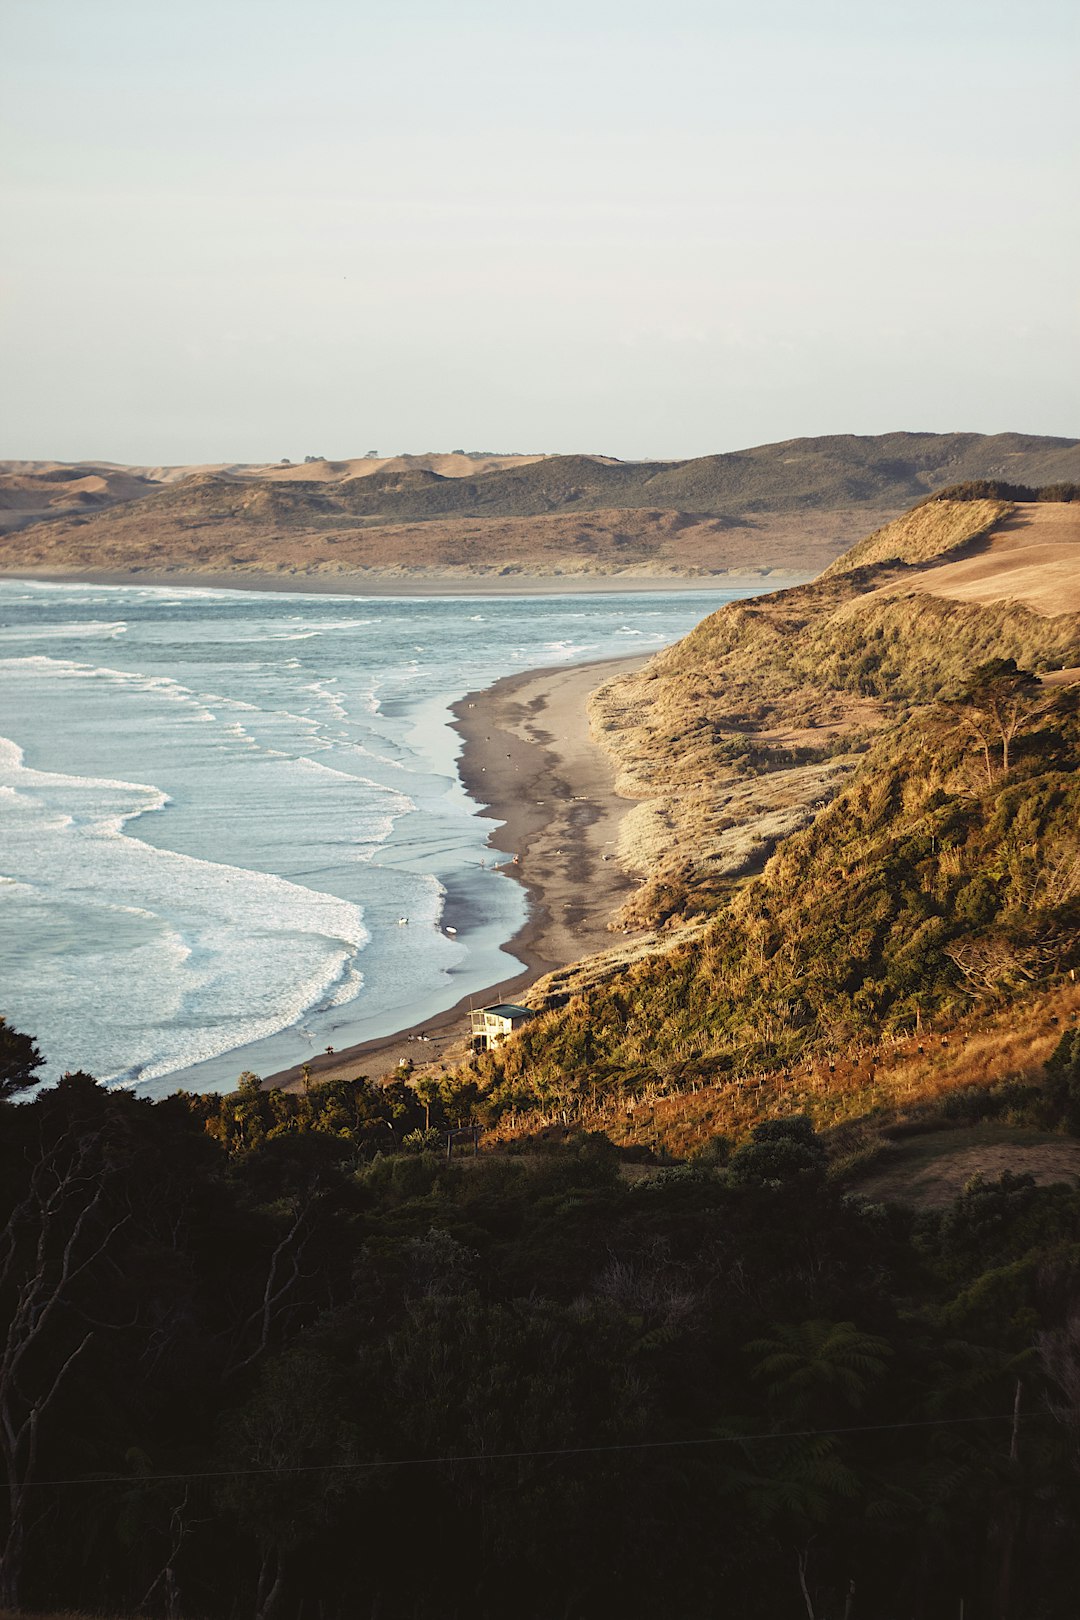 Travel Tips and Stories of Raglan in New Zealand